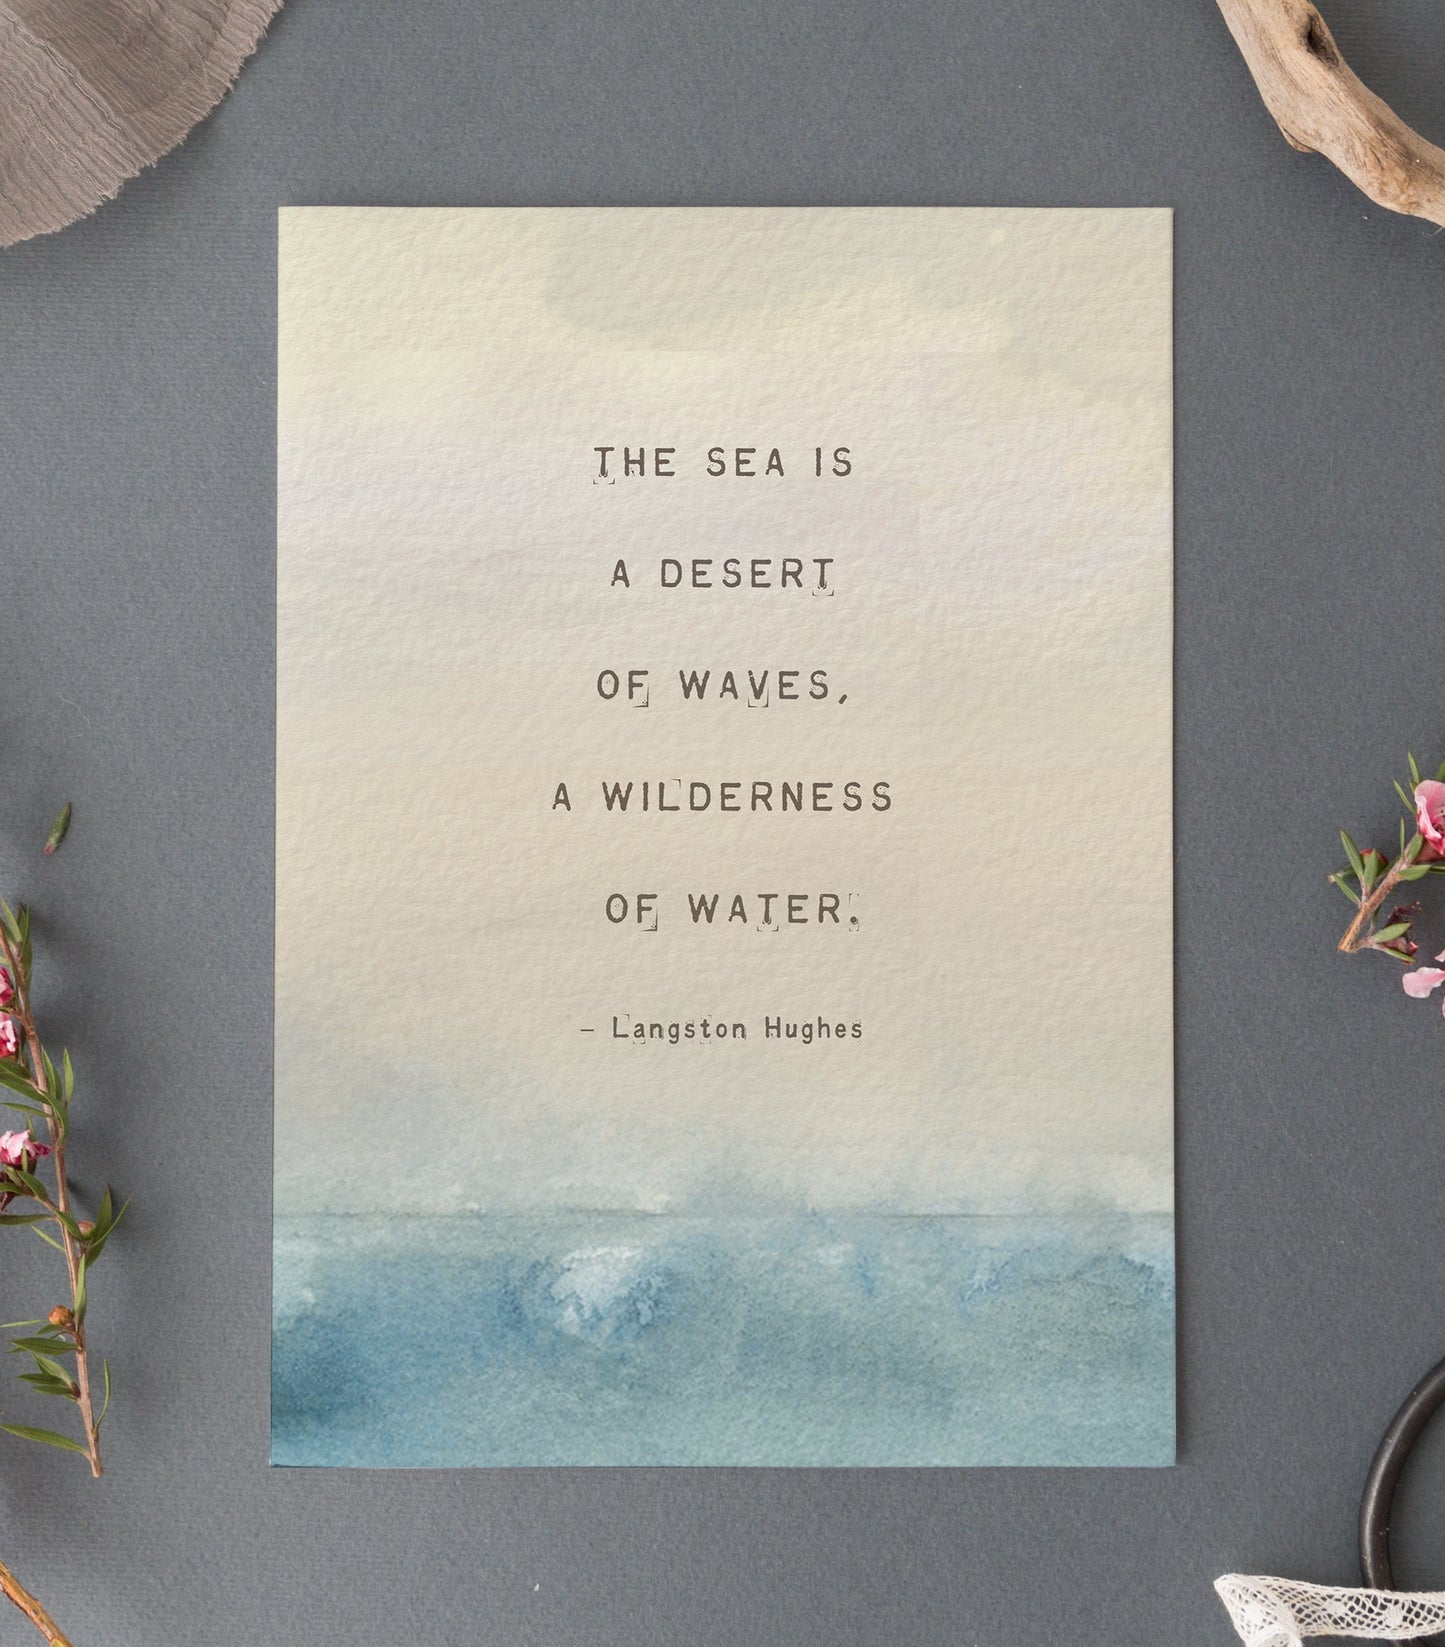 Langston Hughes poetry art "The Sea is a Desert of Waves..." nature wall art